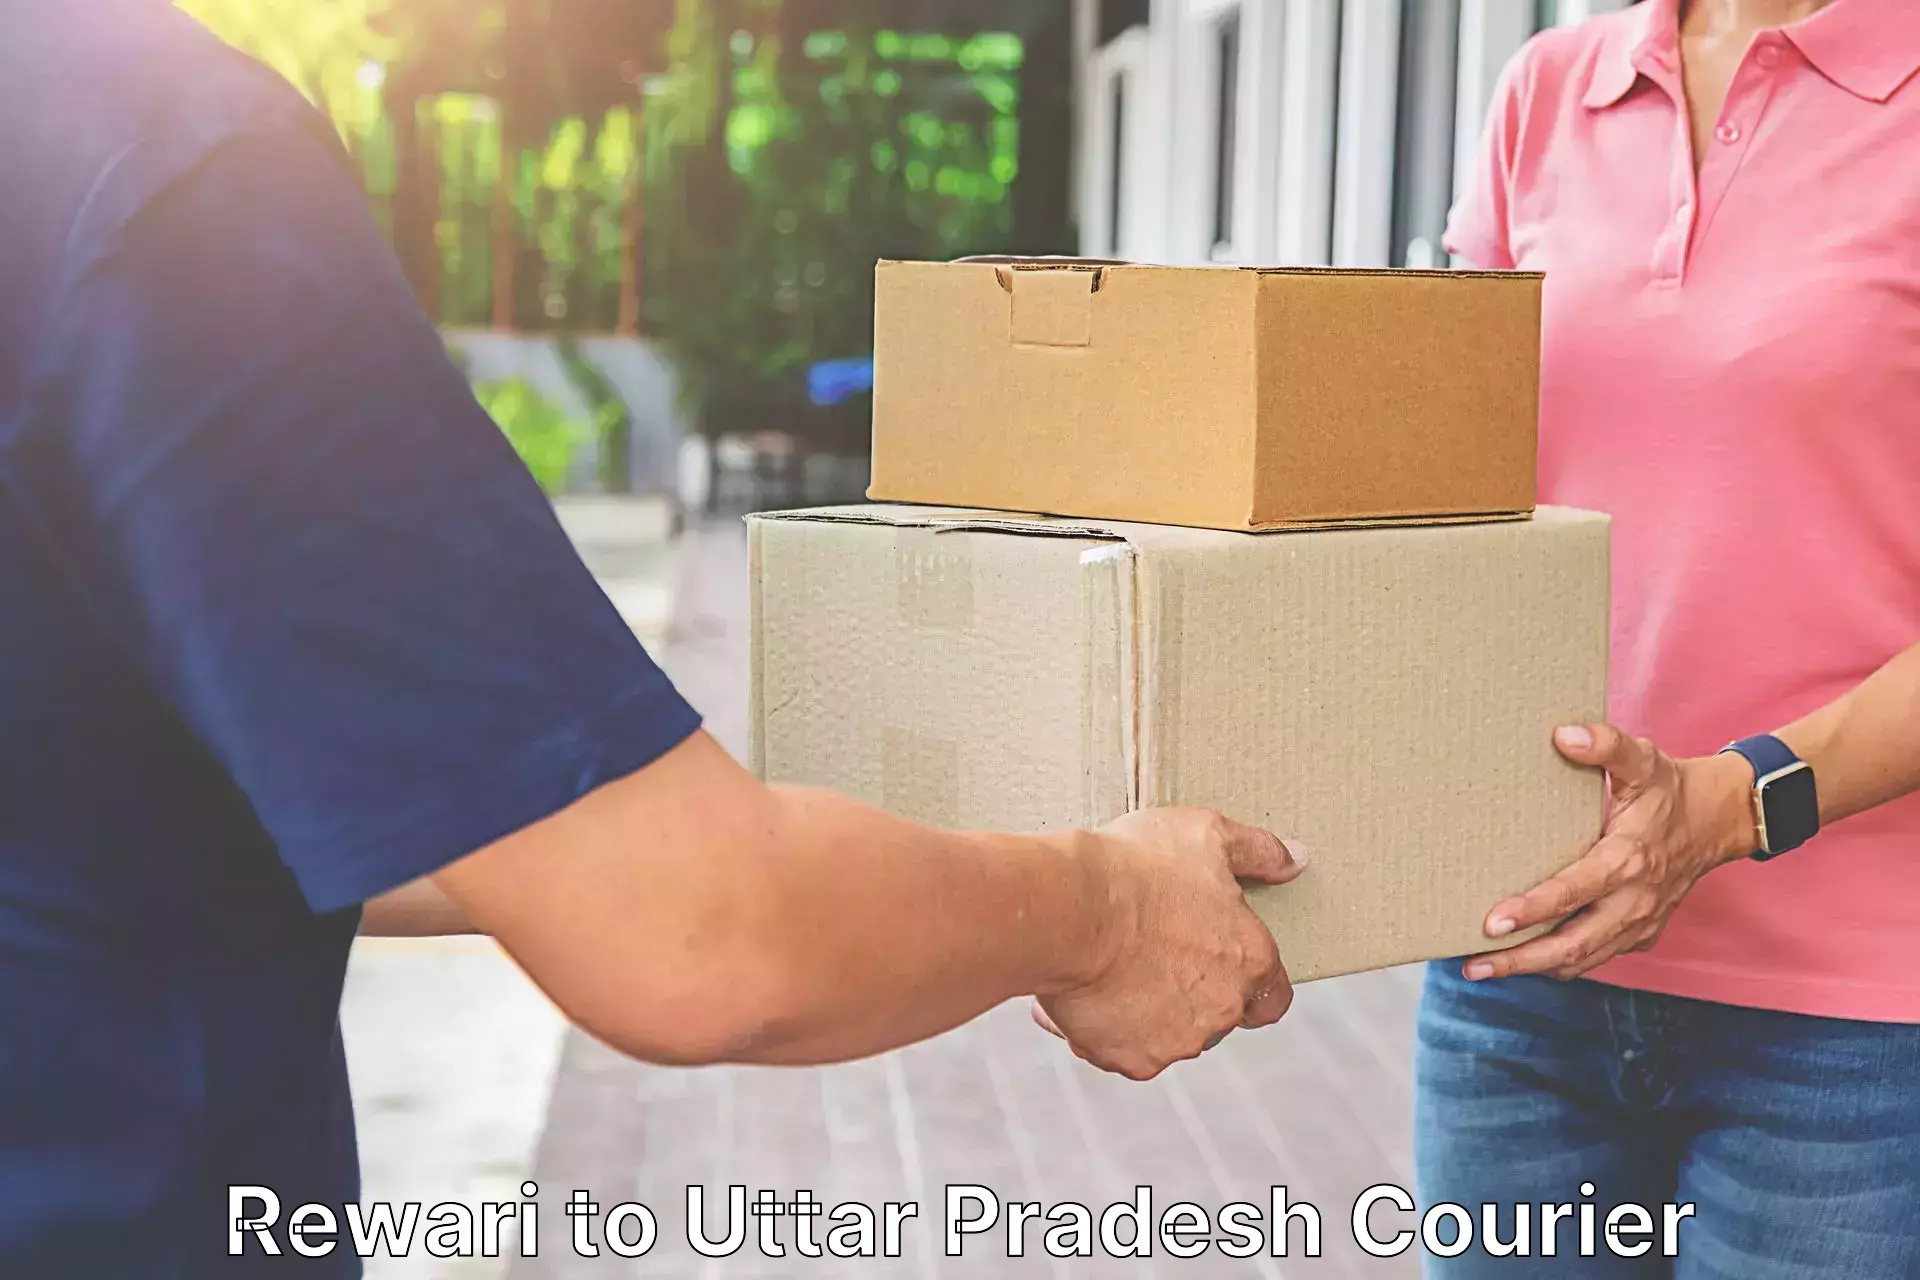 Affordable international shipping in Rewari to Sultanpur